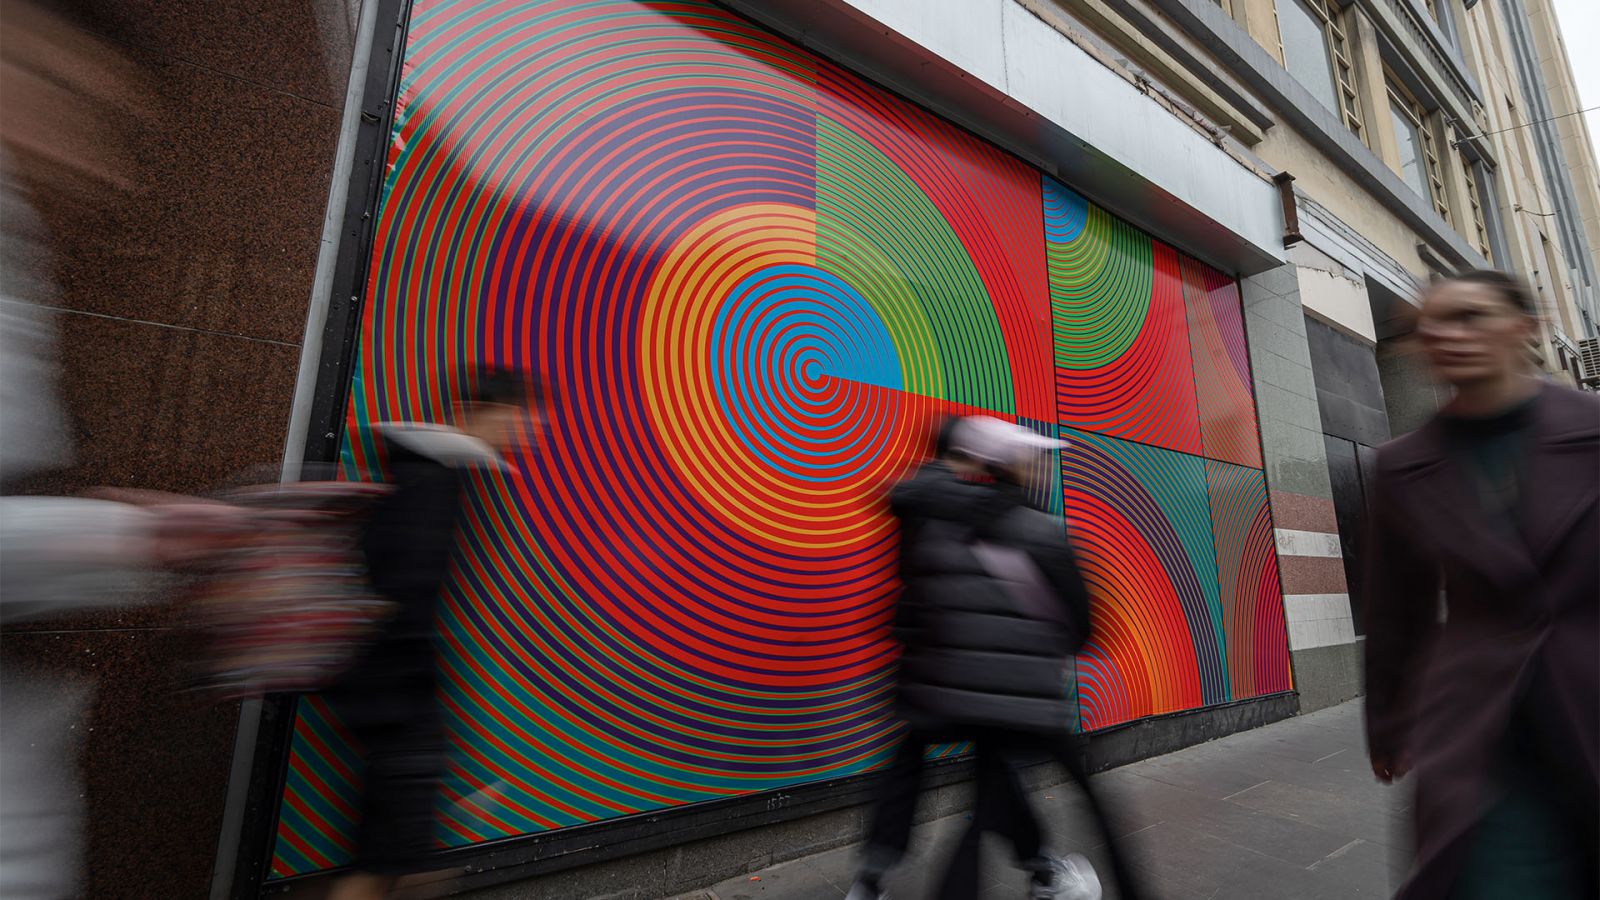 Figures walk past a colourful artwork on a hoarding 